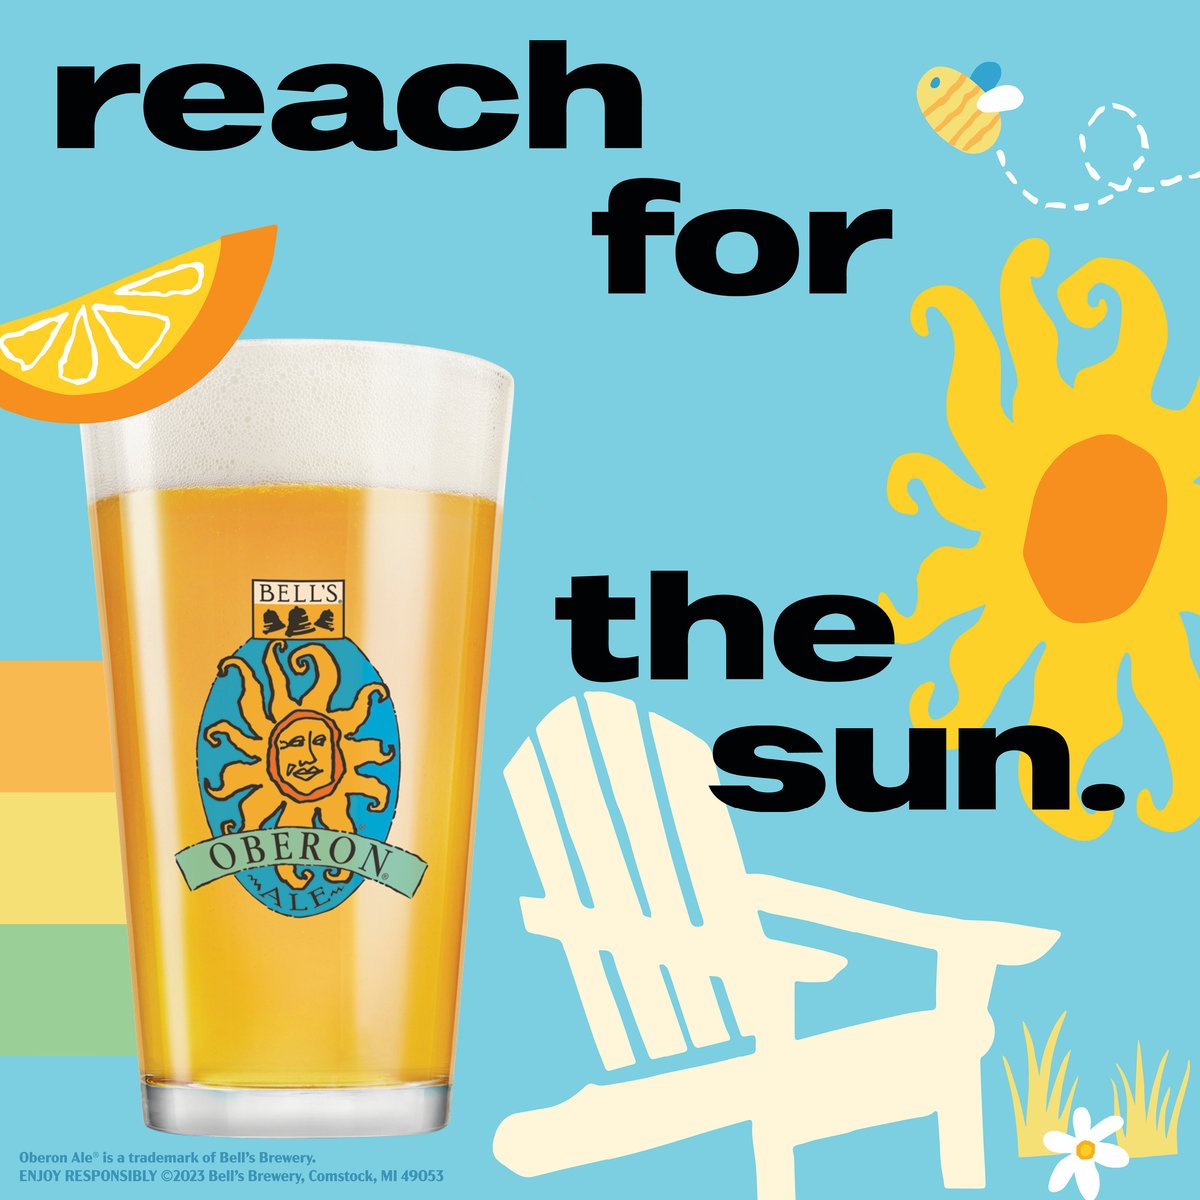 Citrusy, easy drinking and refreshing, Oberon Ale is sunshine in a glass. Get into a summer state of mind and #ReachForTheSun.